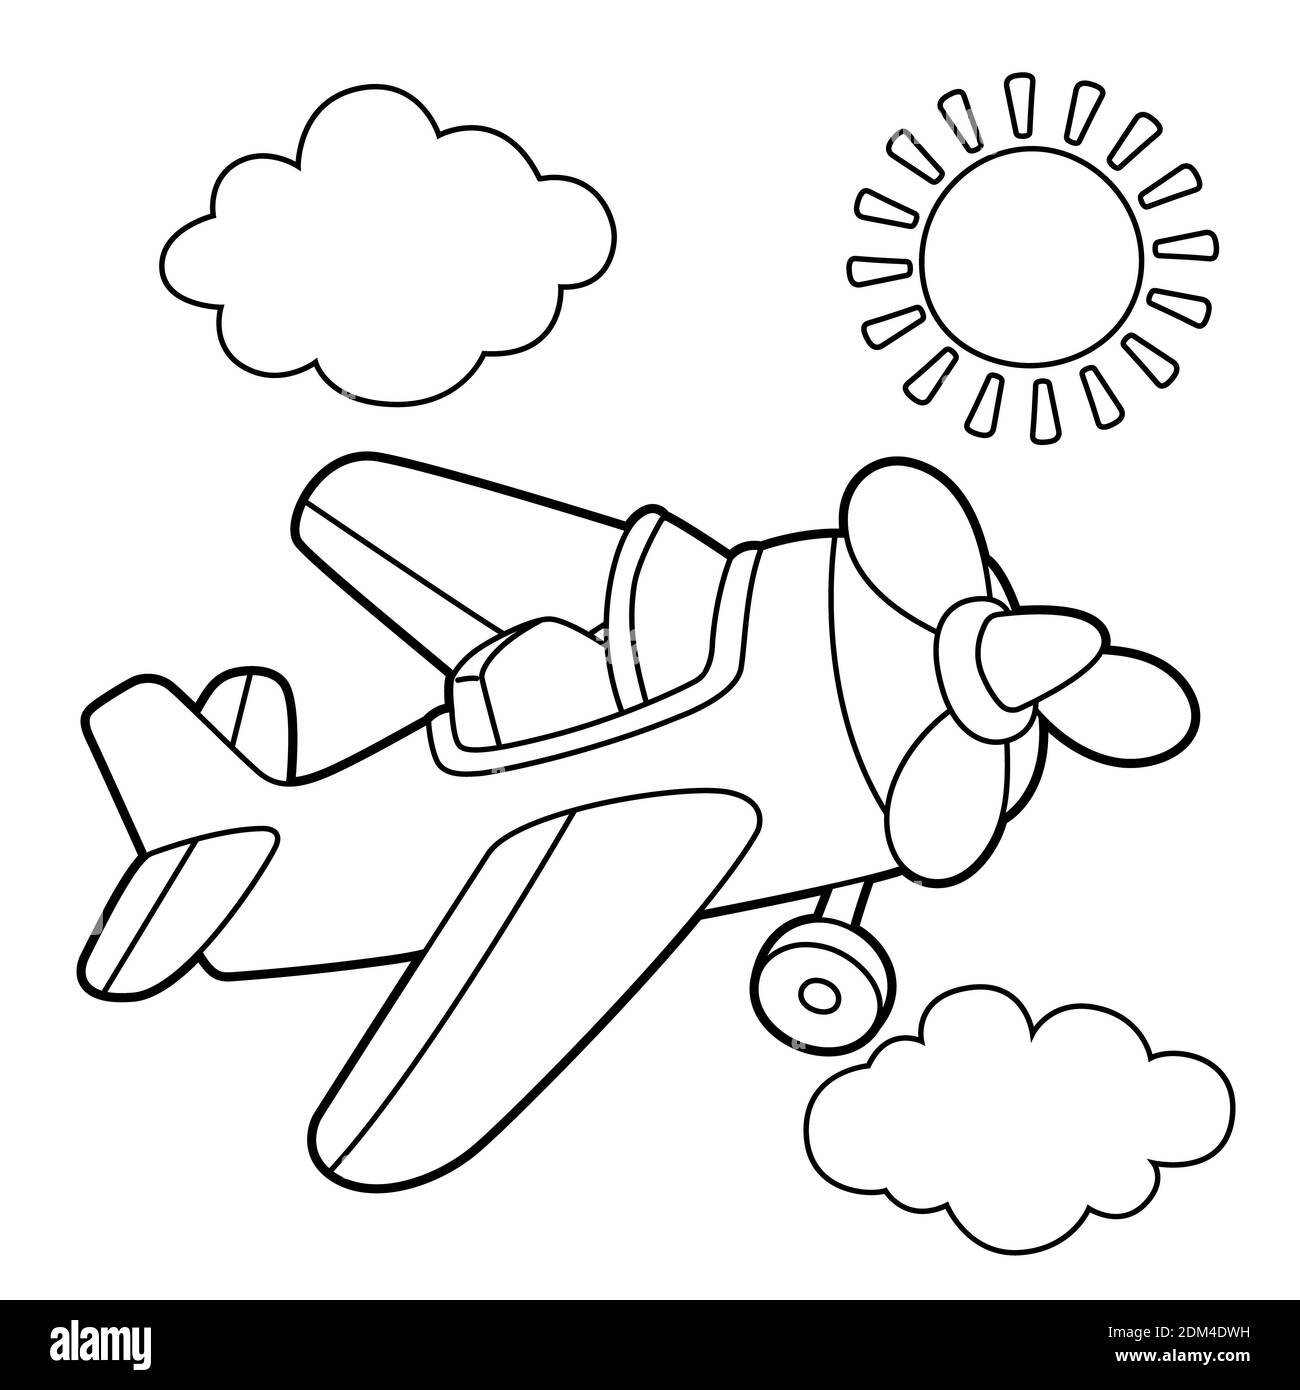 Propeller plane coloring page. Provides hours of coloring fun for children. To color this page is very easy. Suitable for little kids and toddlers. Stock Photo